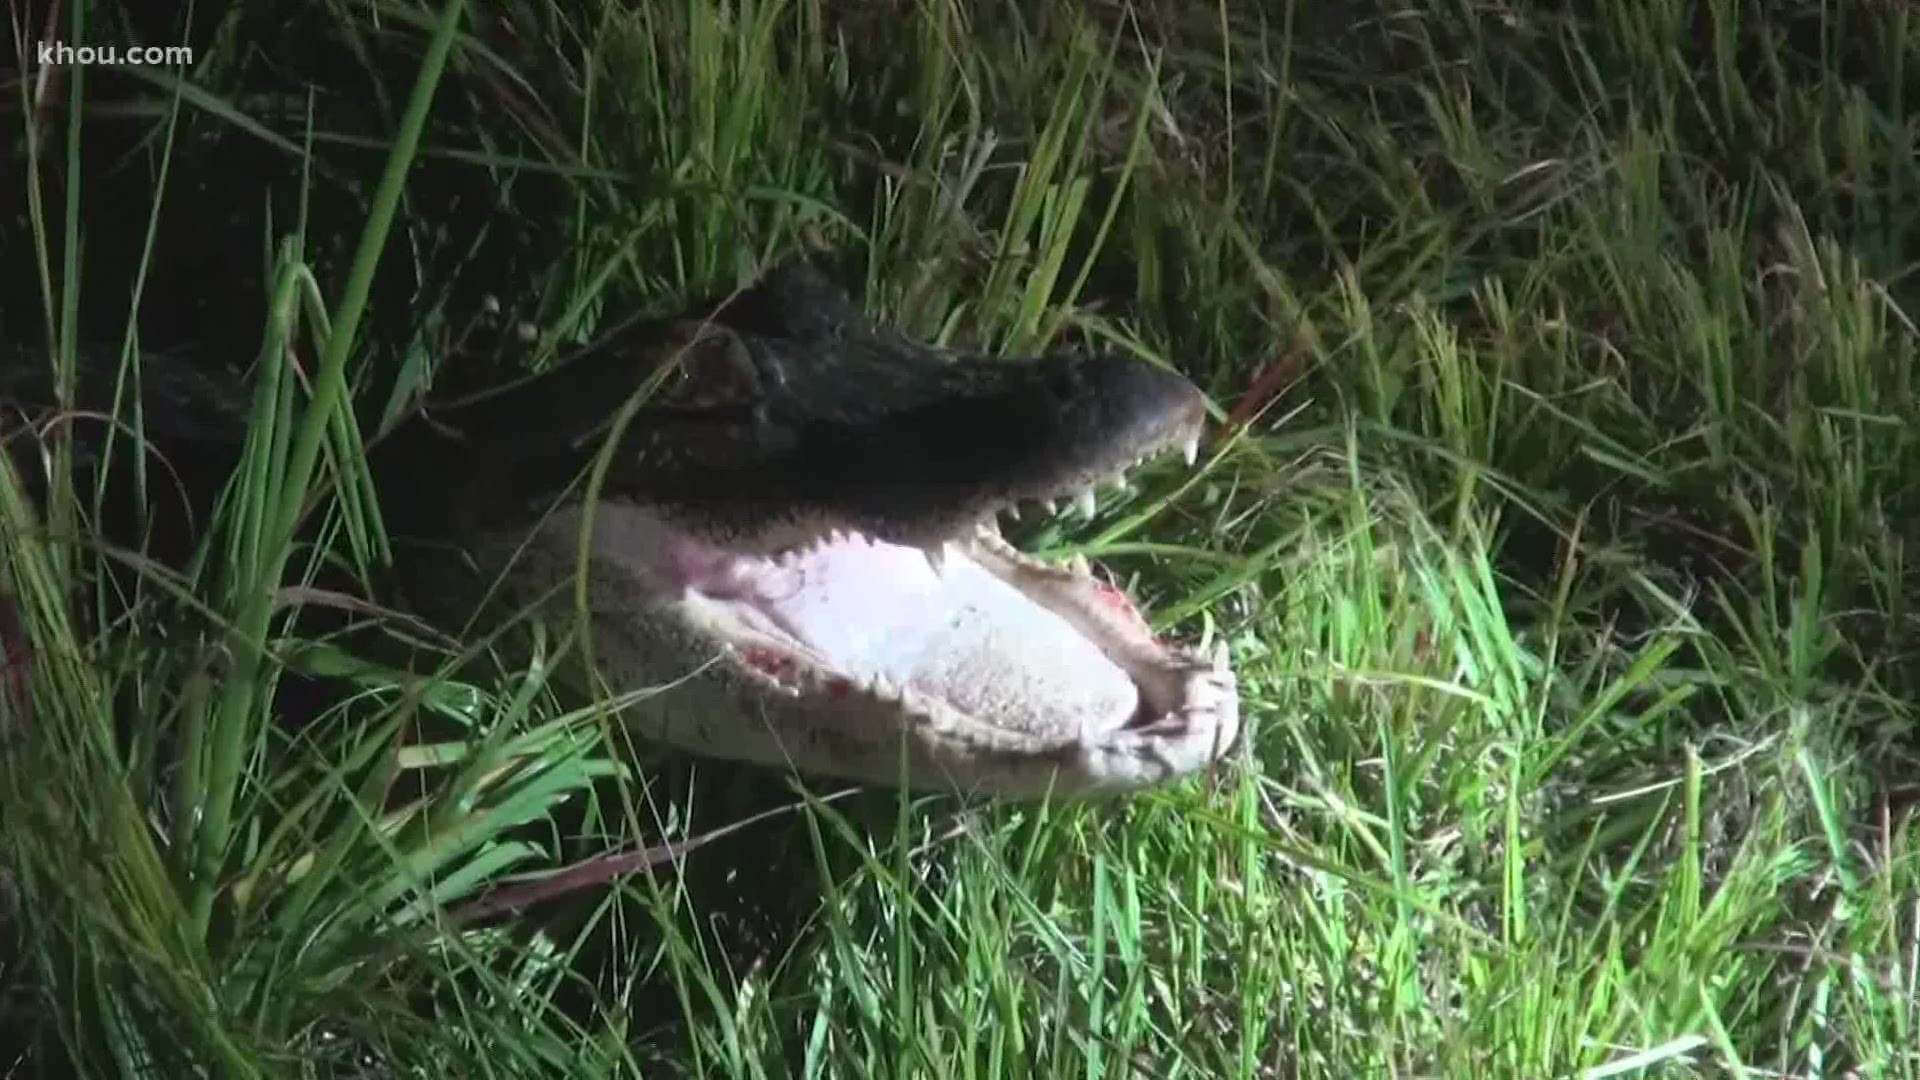 An injured alligator apparently didn’t realize Conroe police and DPS troopers were trying to help it early Thursday.